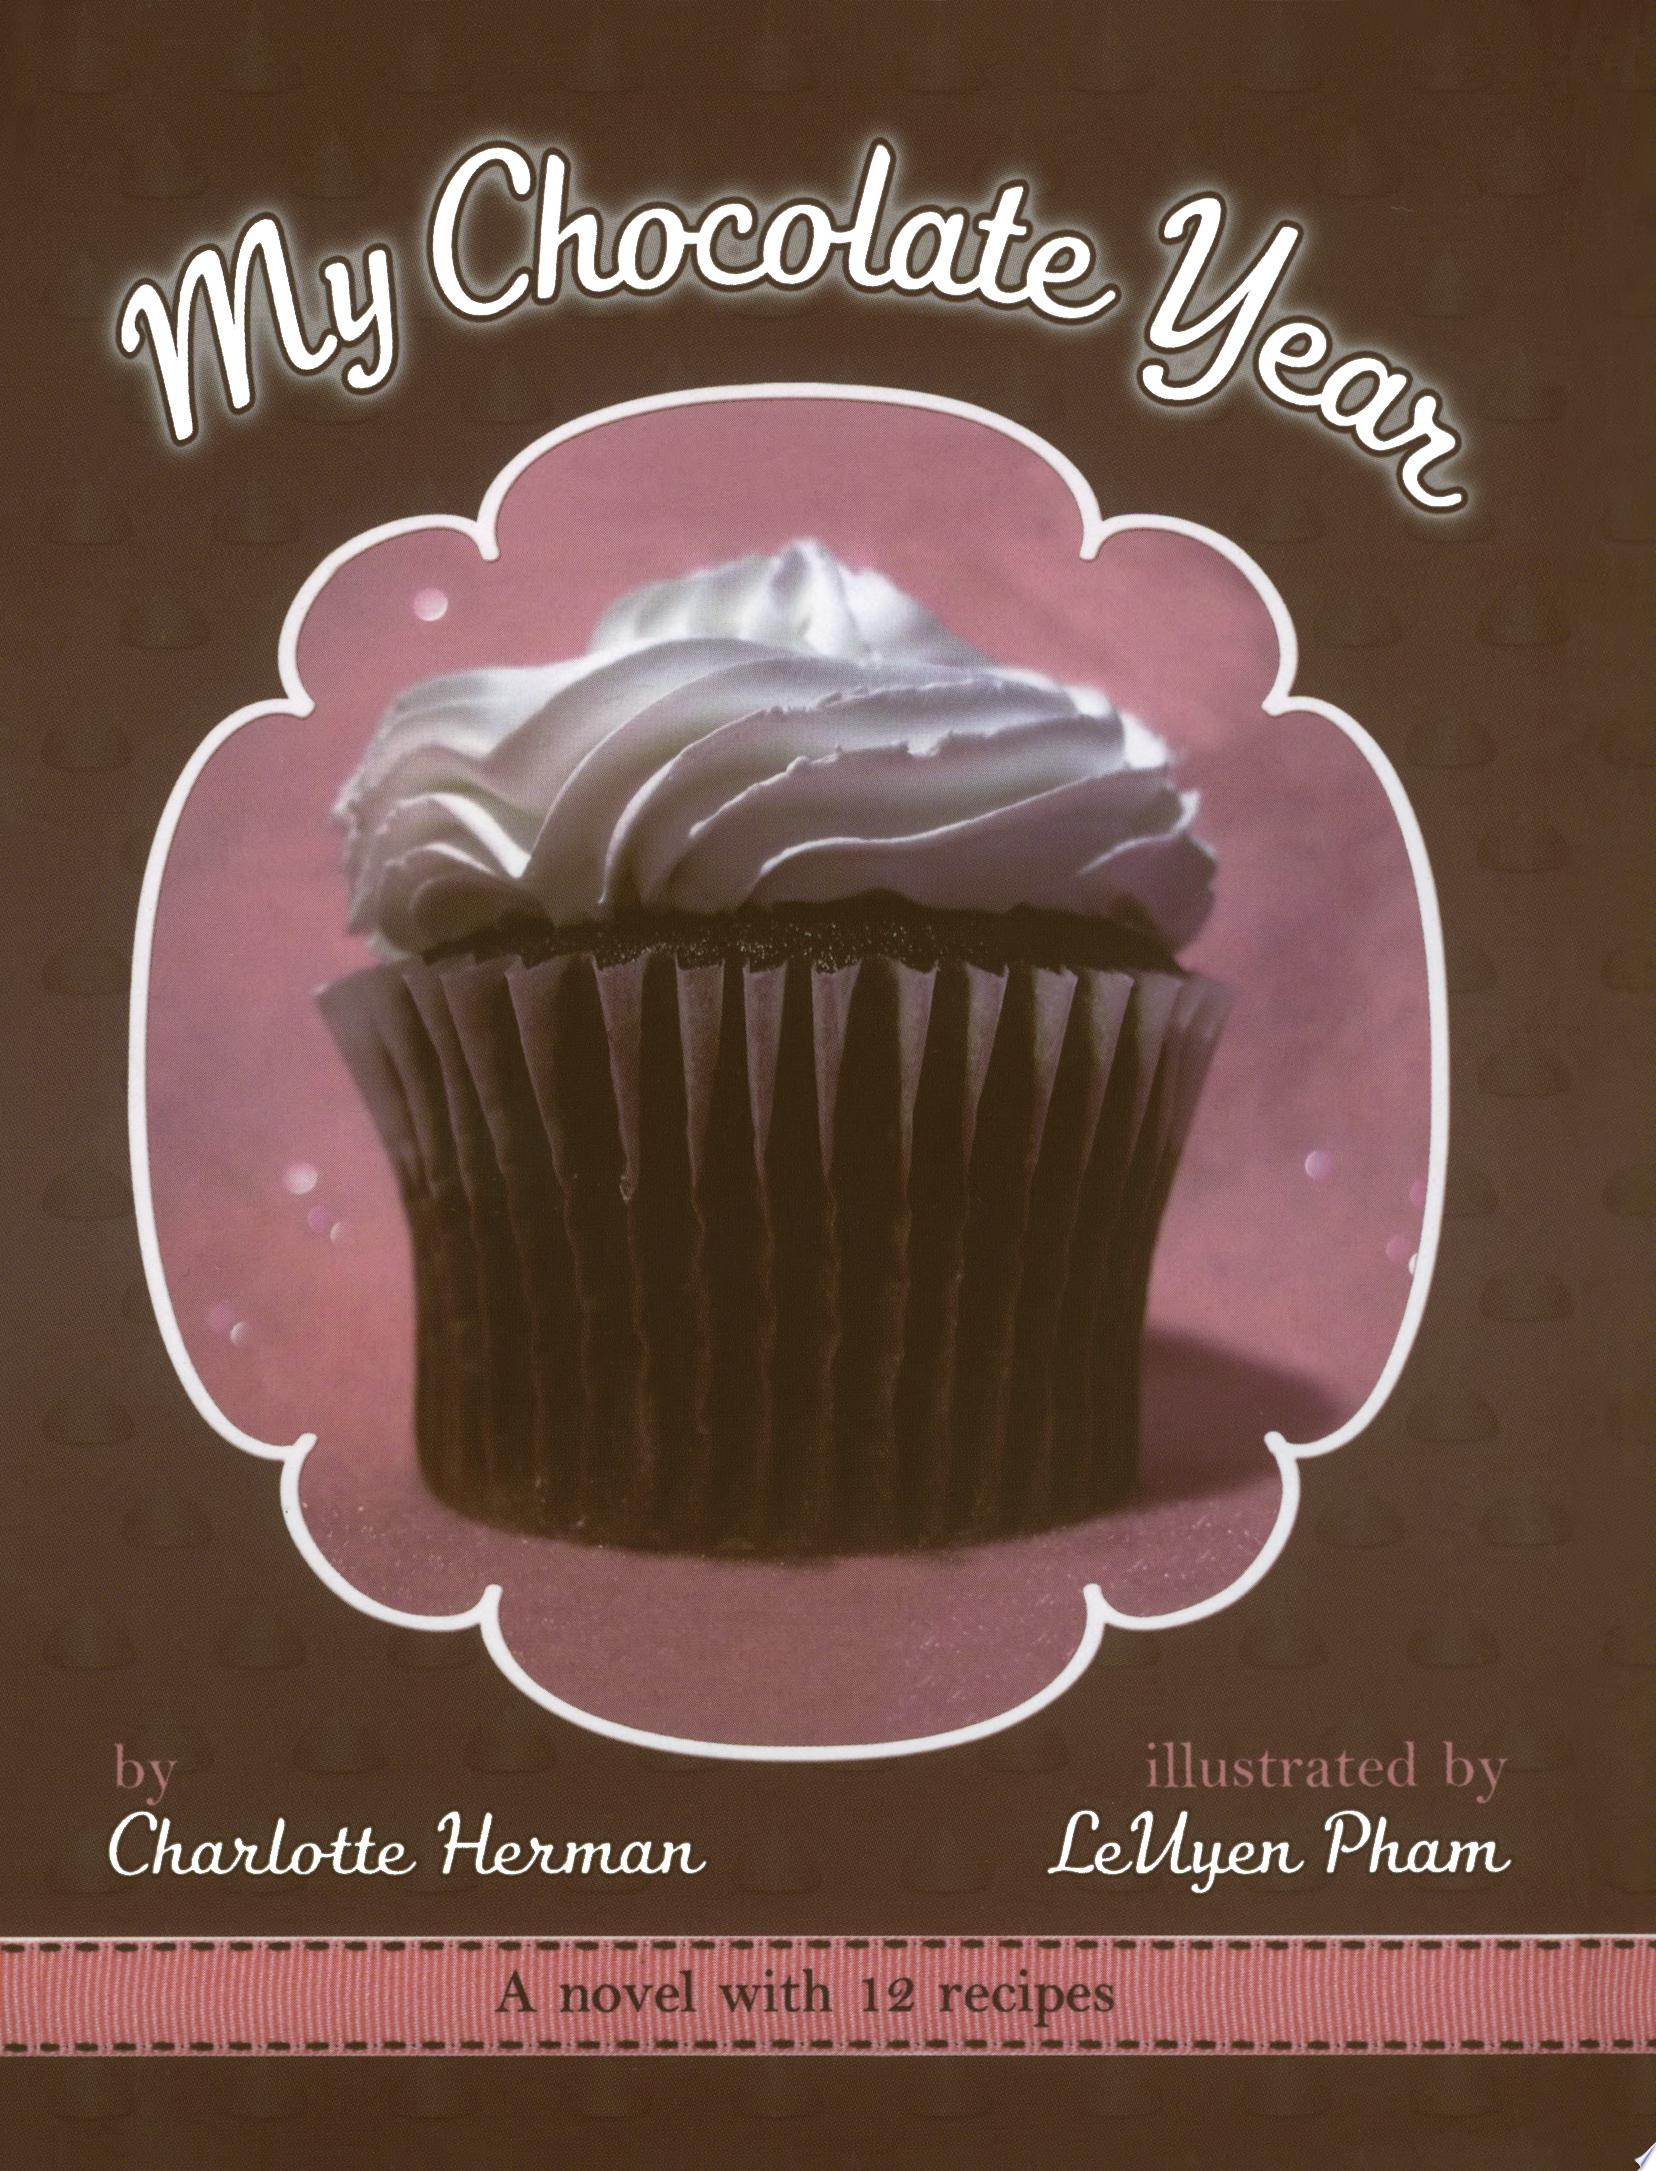 Image for "My Chocolate Year"